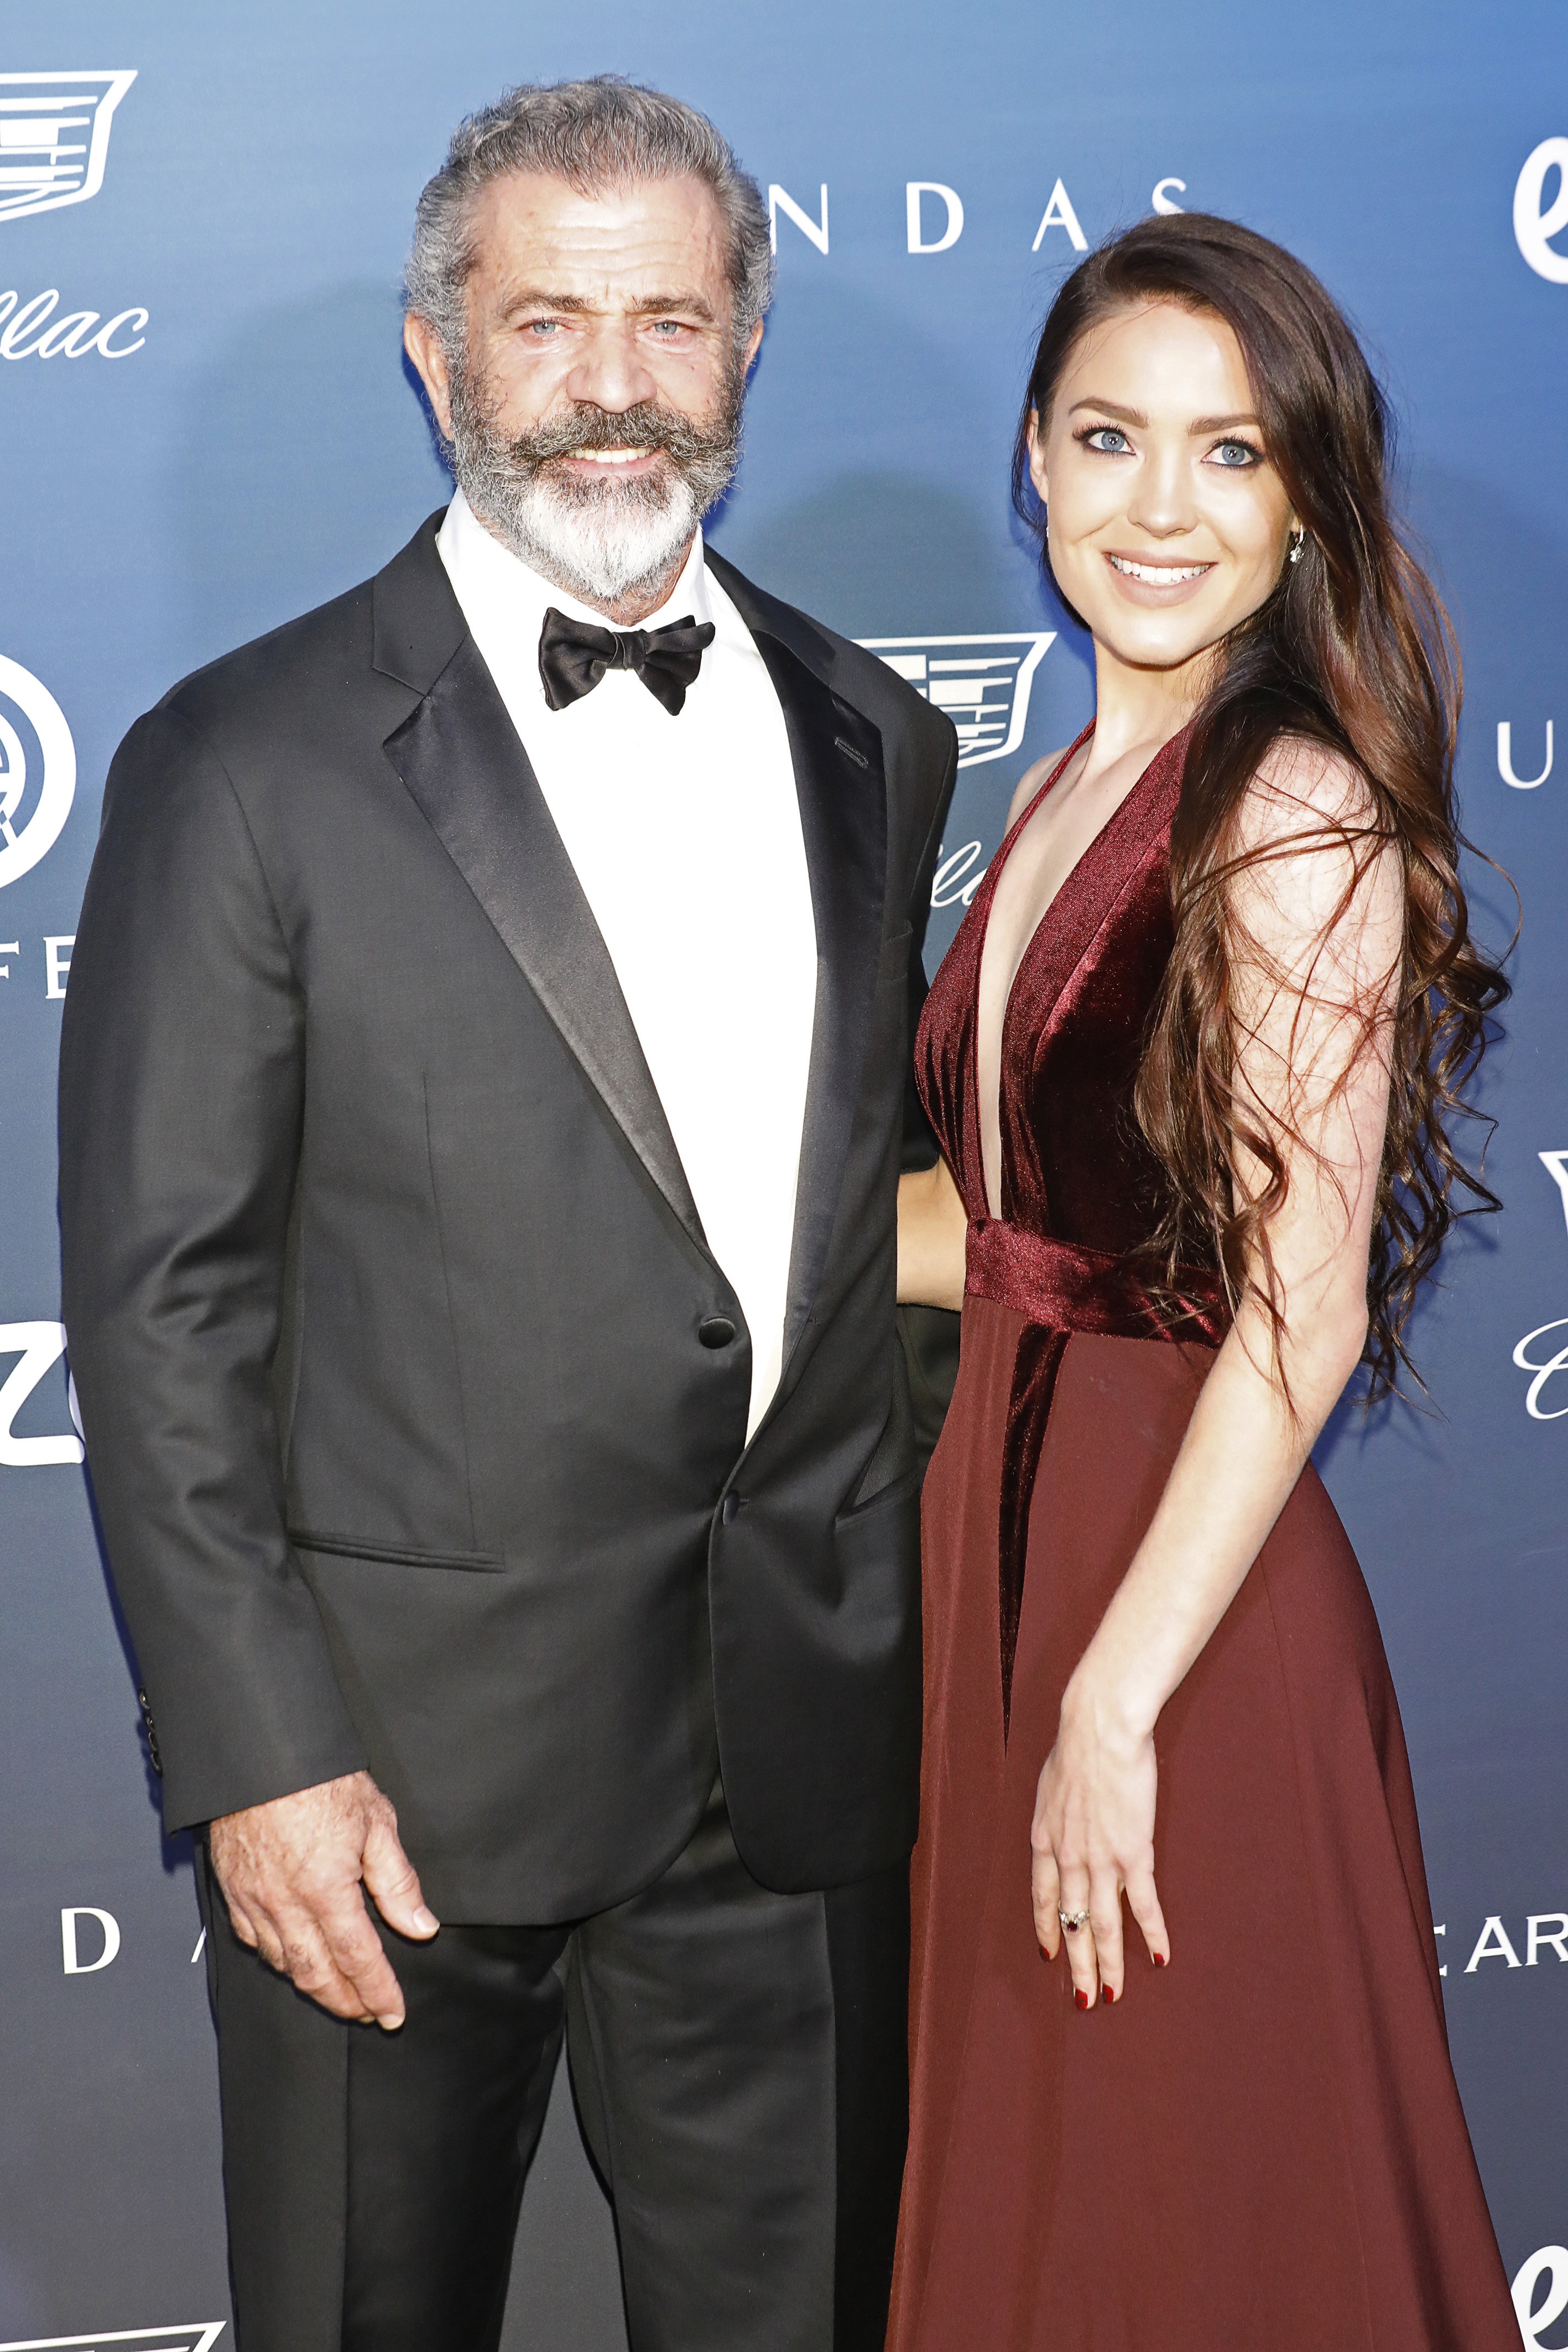 Mel Gibson with longtime girlfriend Rosalind Ross attending "Heaven" the "The Art of Elysium's 12th Annual Black Tie Artistic Experience" on January 5, 2019 in Los Angeles, California. / Source: Getty Images